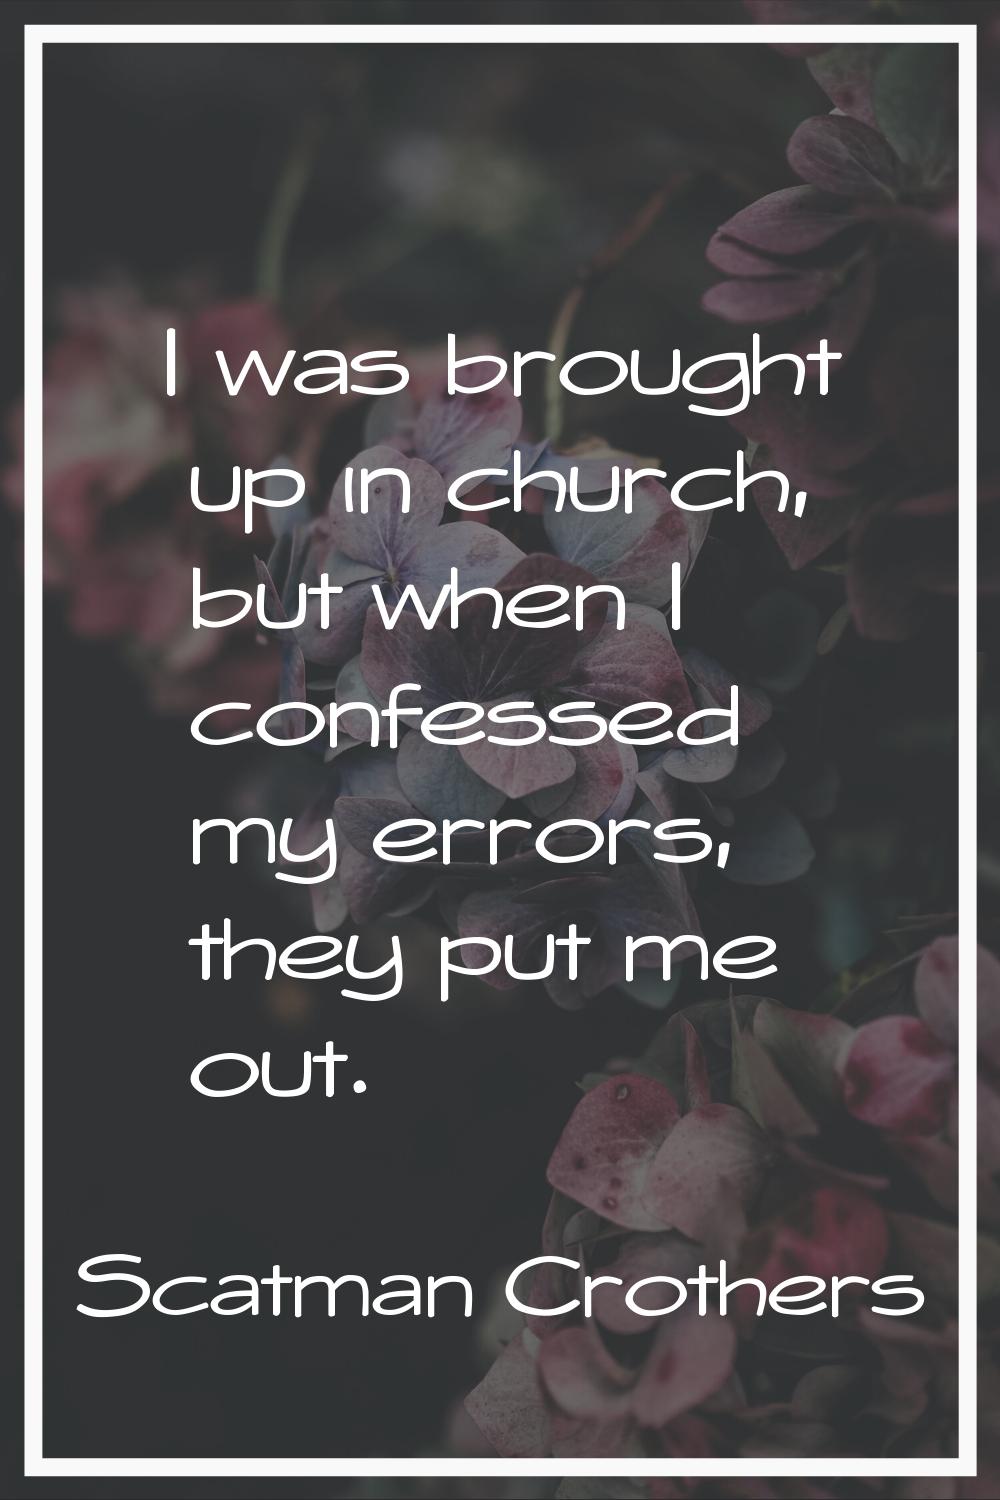 I was brought up in church, but when I confessed my errors, they put me out.